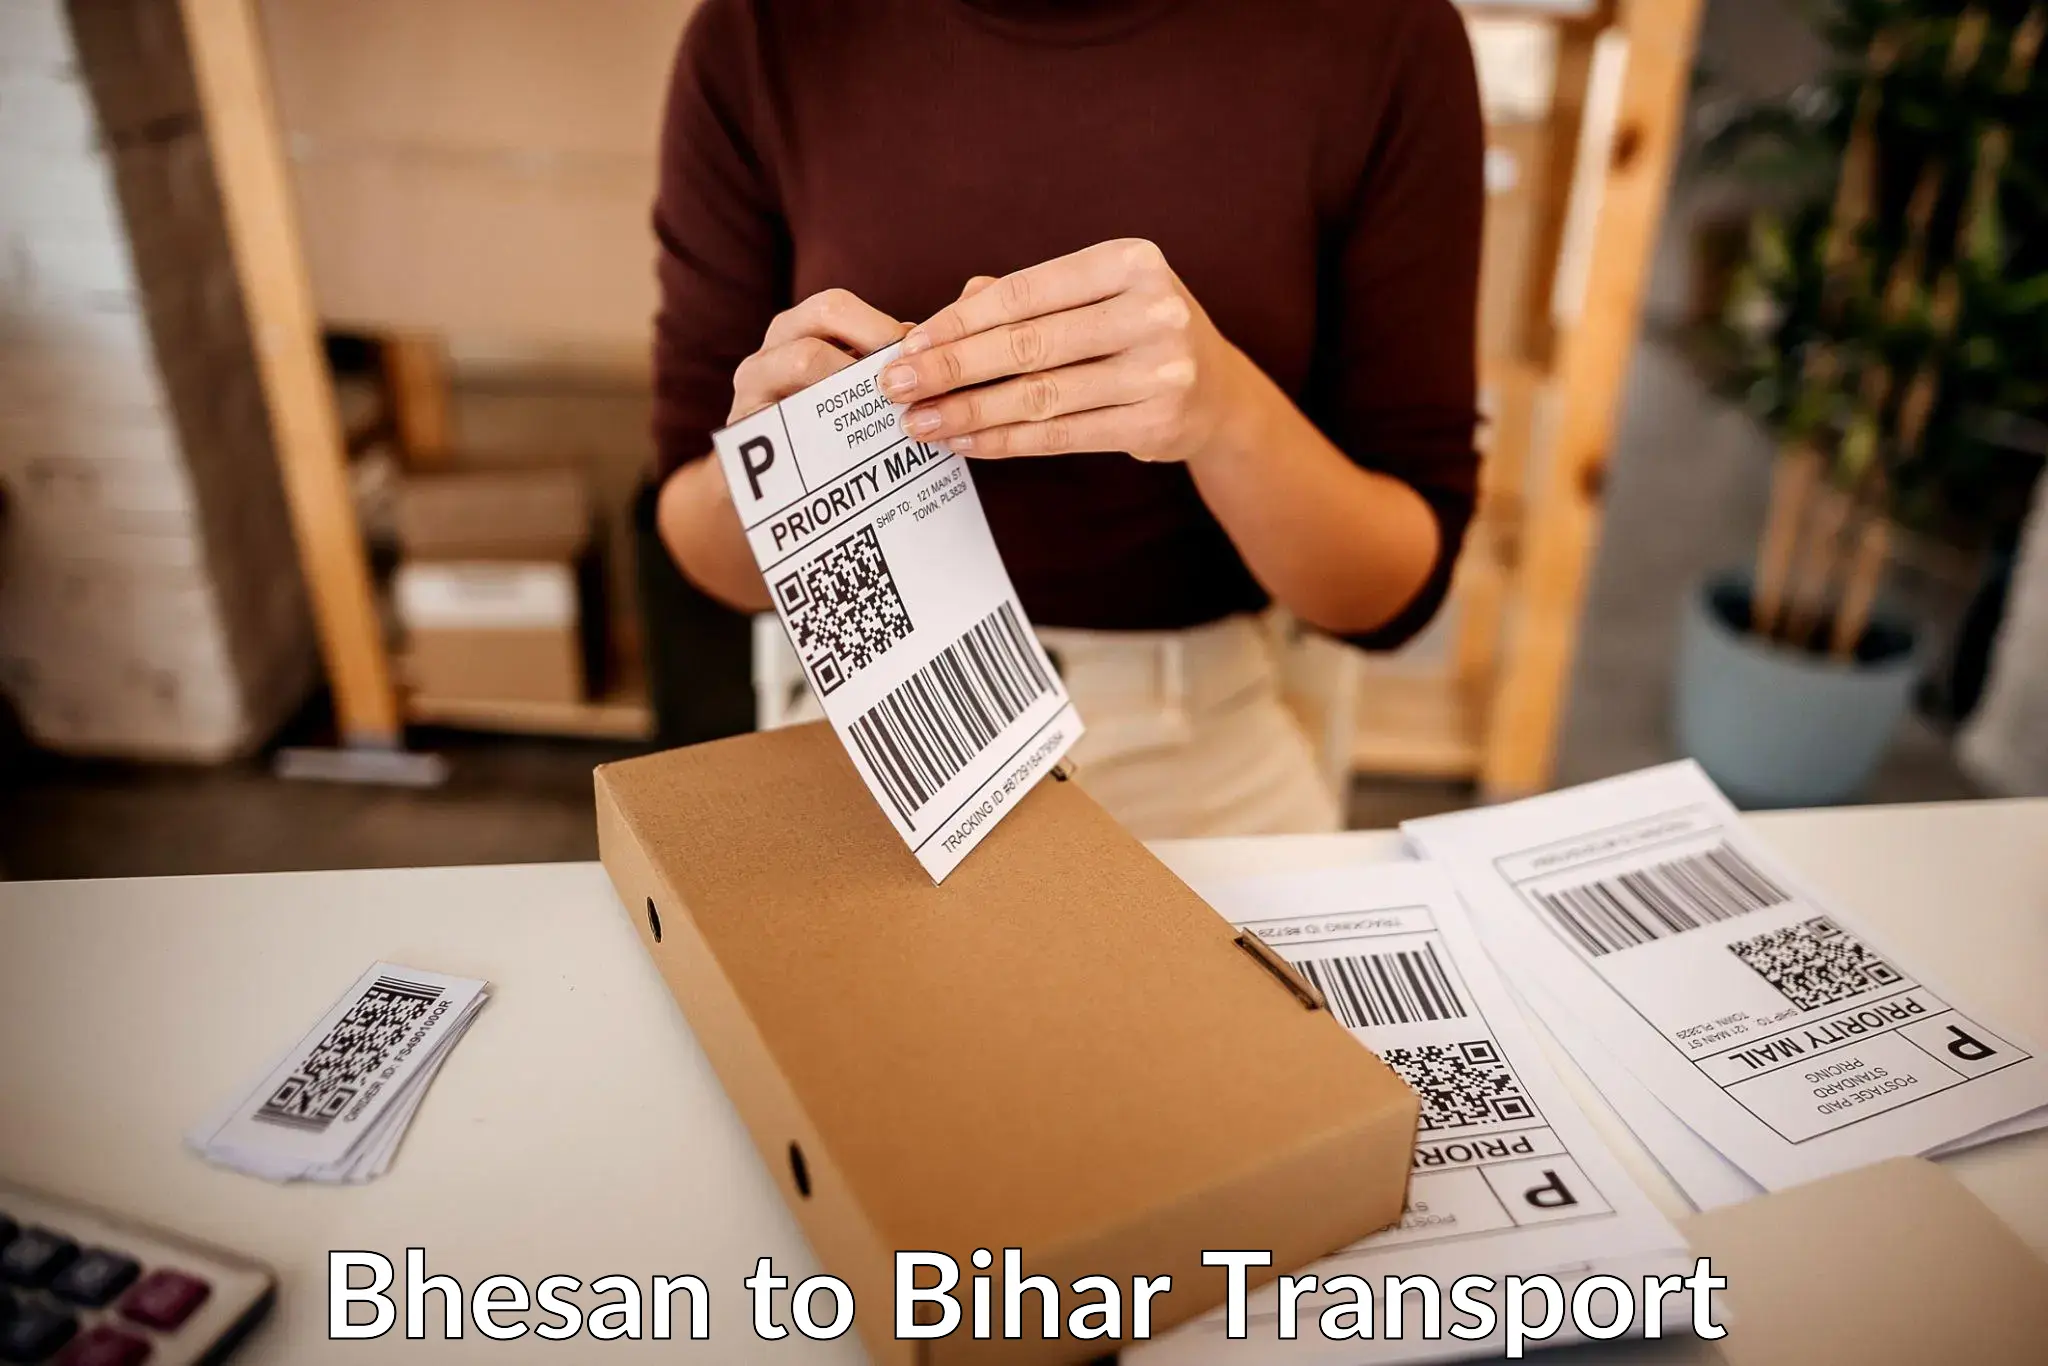 Package delivery services in Bhesan to Aurangabad Bihar